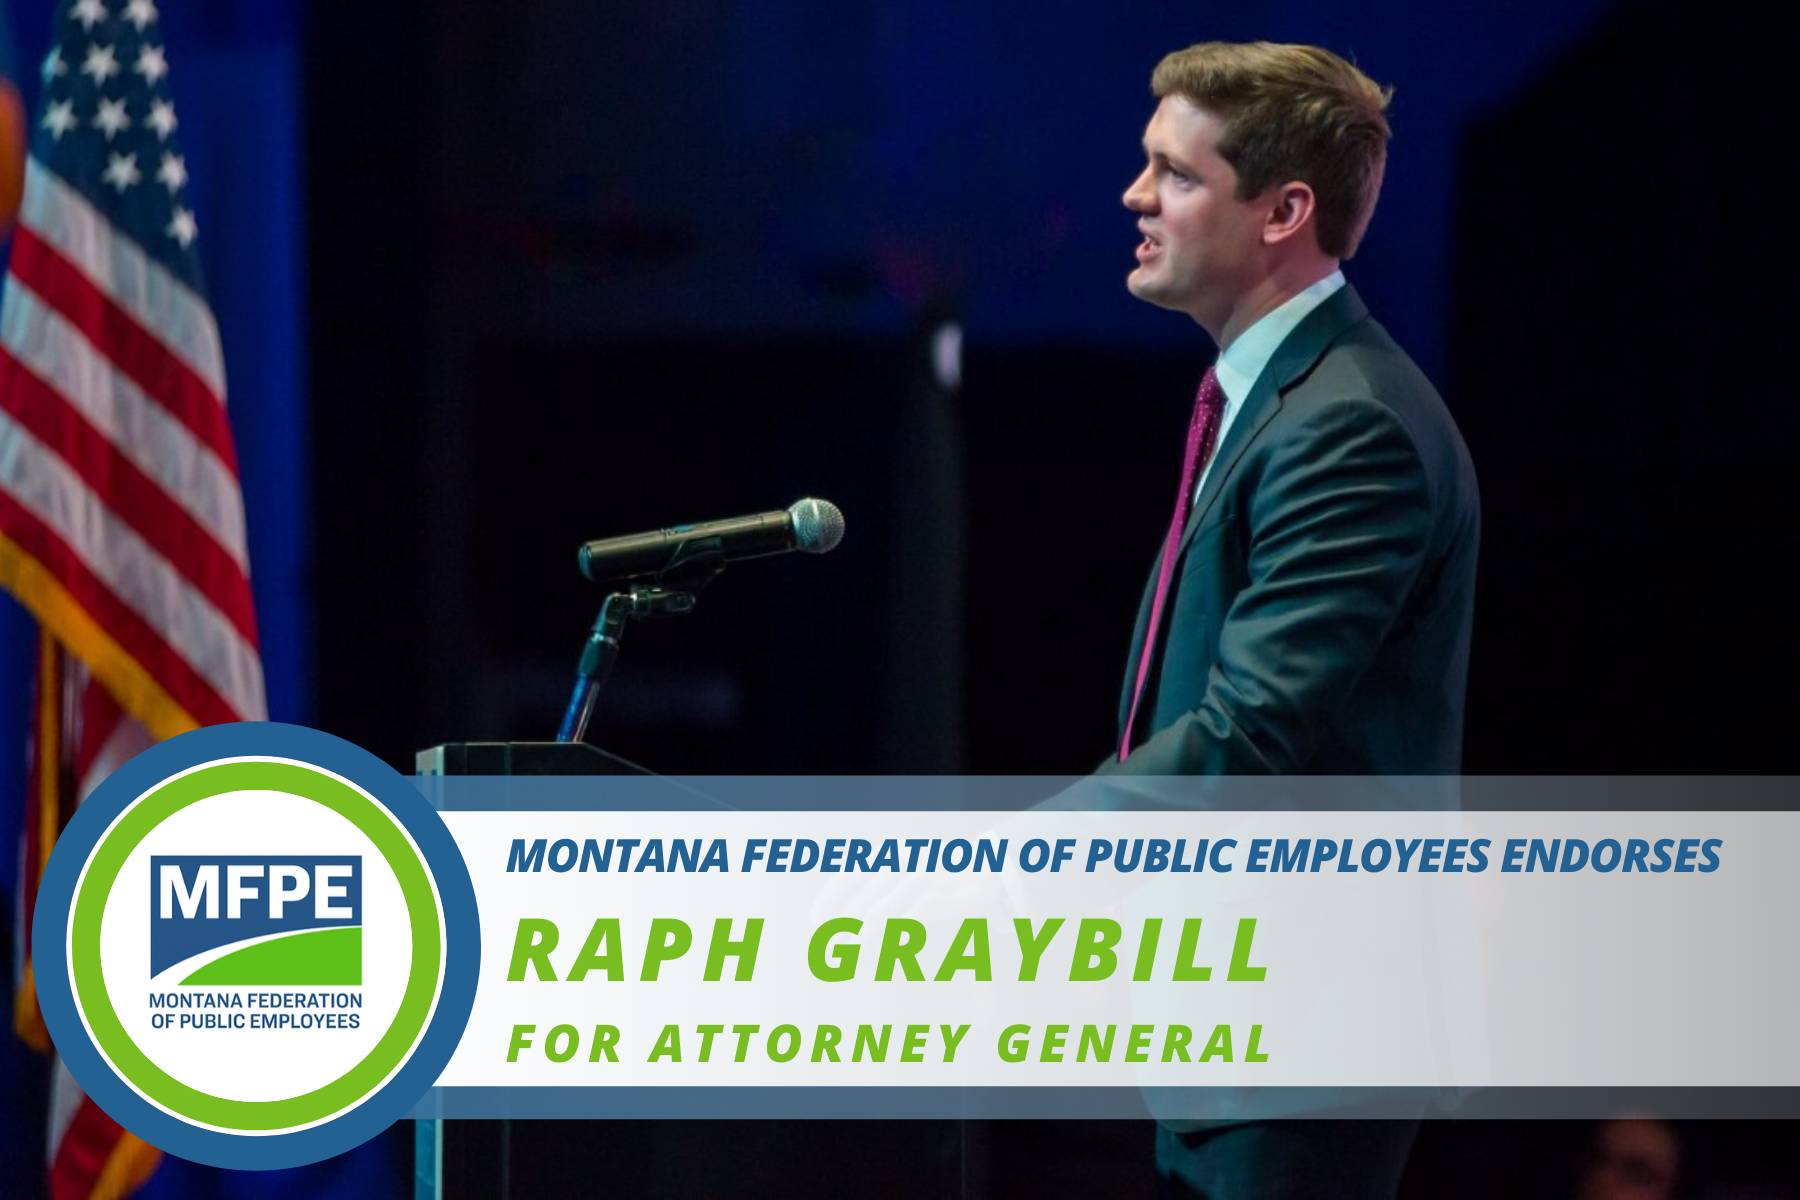 MFPE Announces Endorsement of Raph Graybill for Attorney General